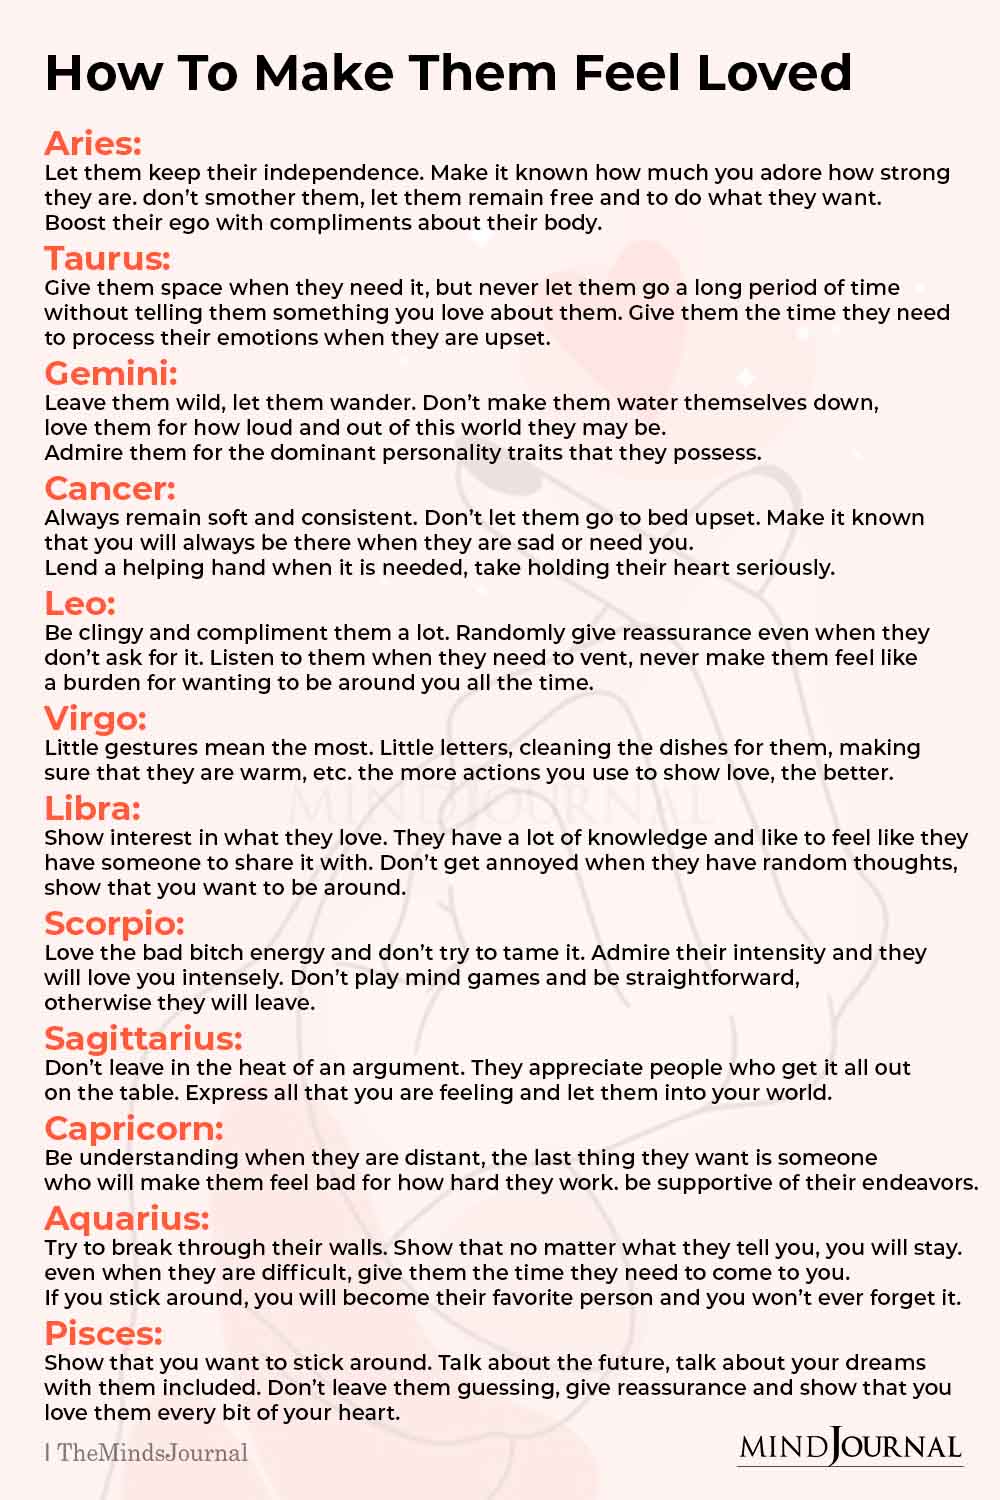 how to make the zodiac signs feel loved